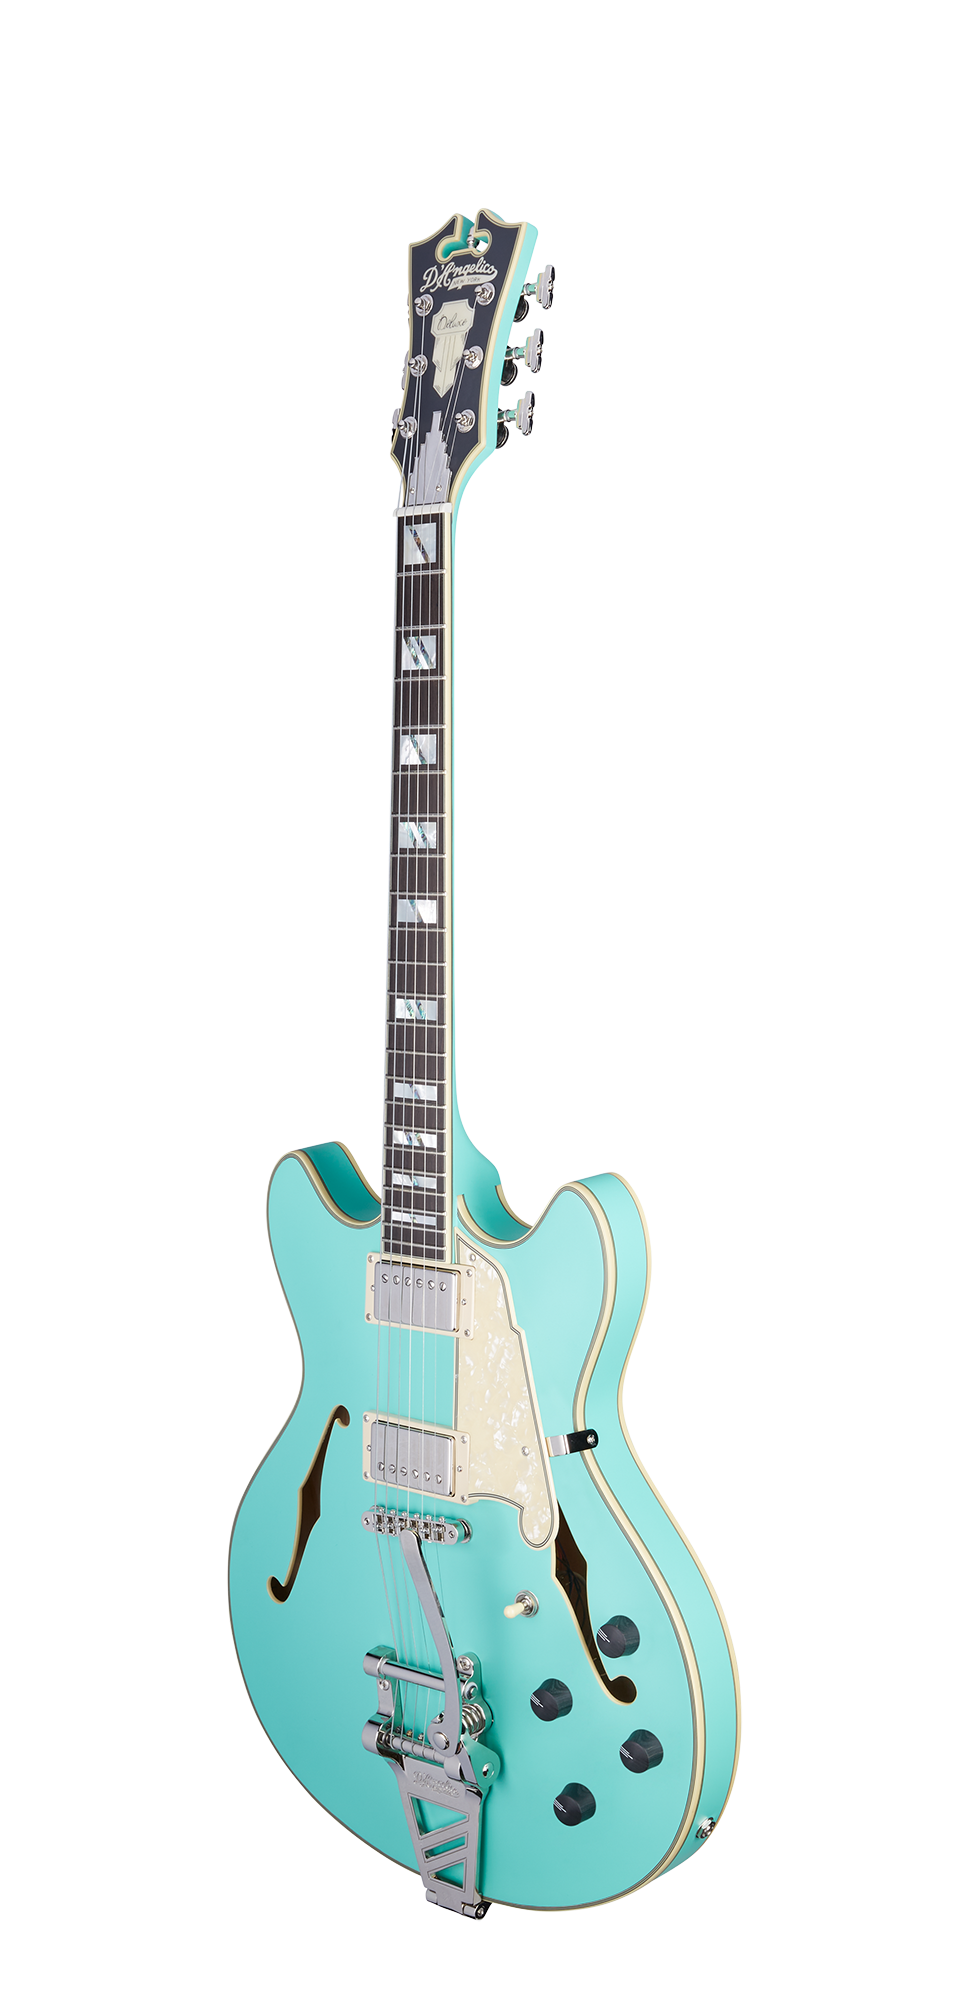 Deluxe DC LE (Discontinued) - D'Angelico Guitars